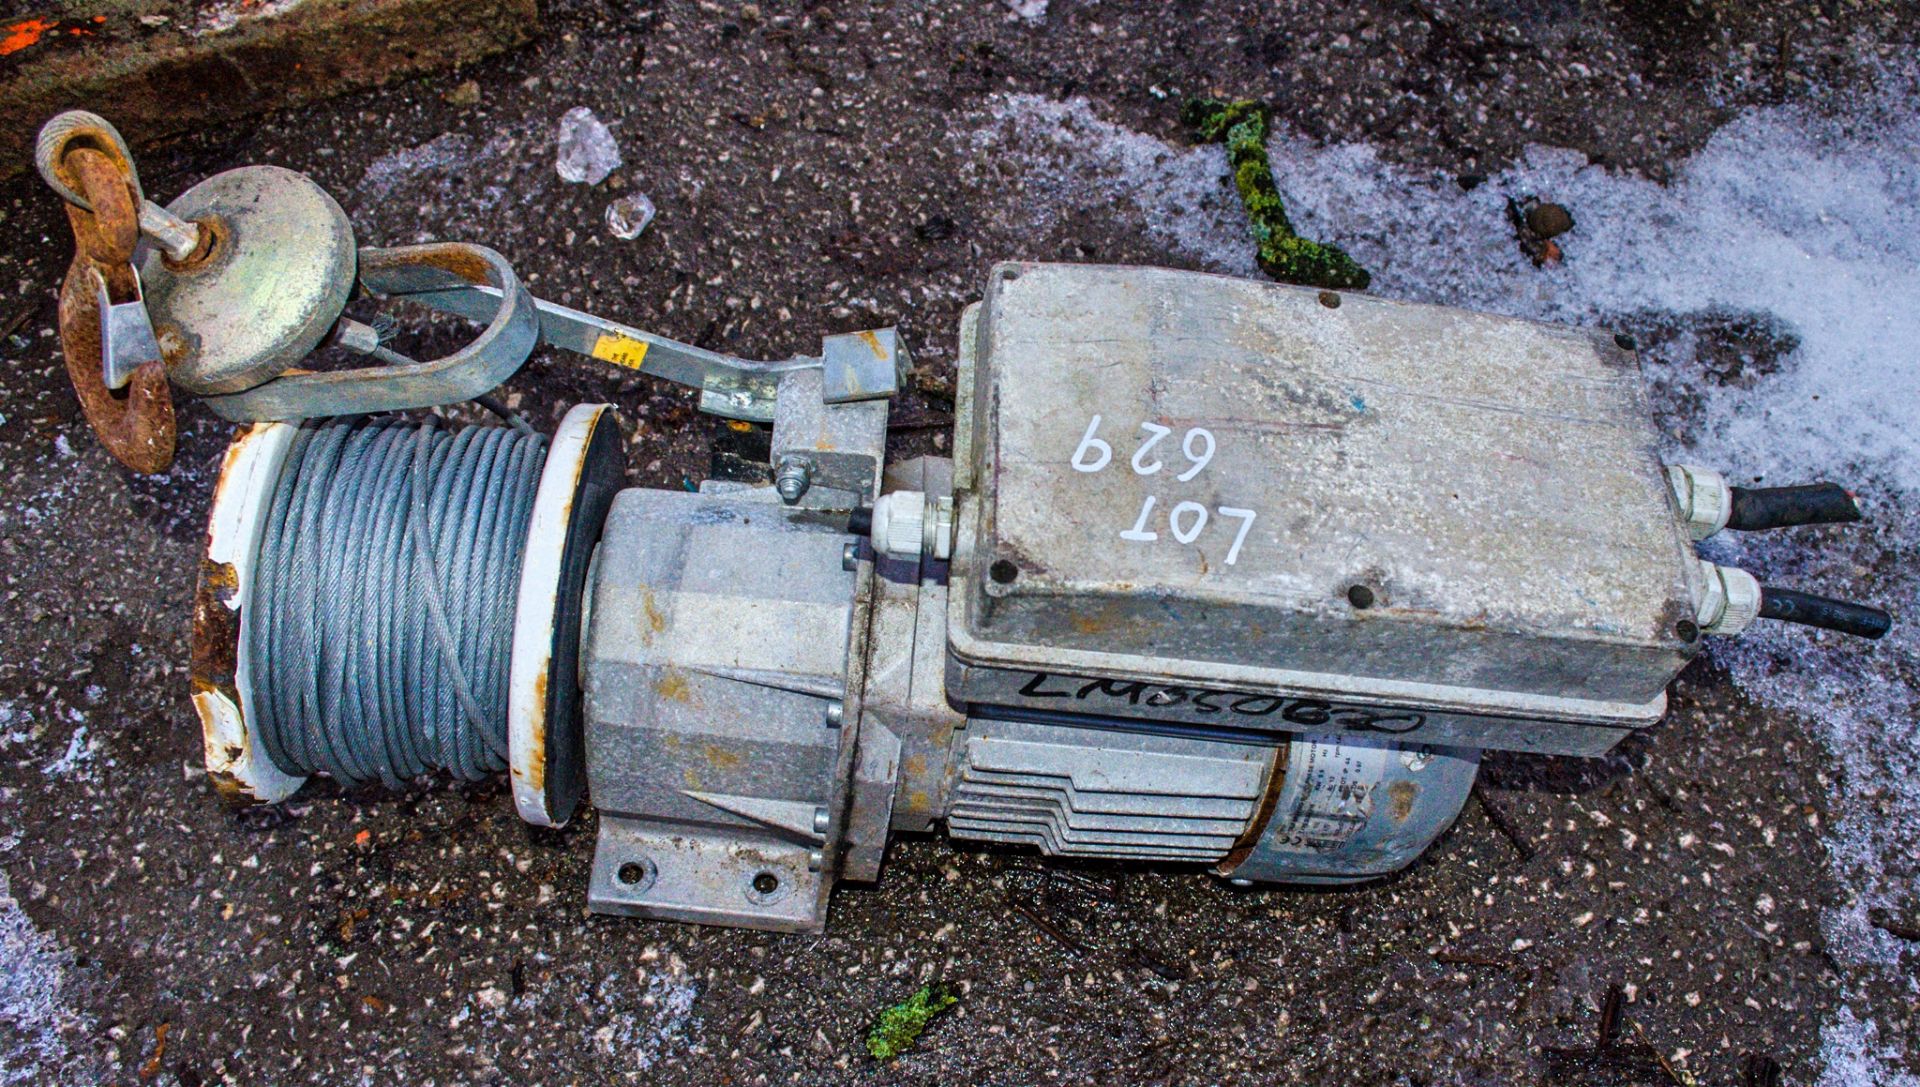 110v electric winch ** Parts missing **